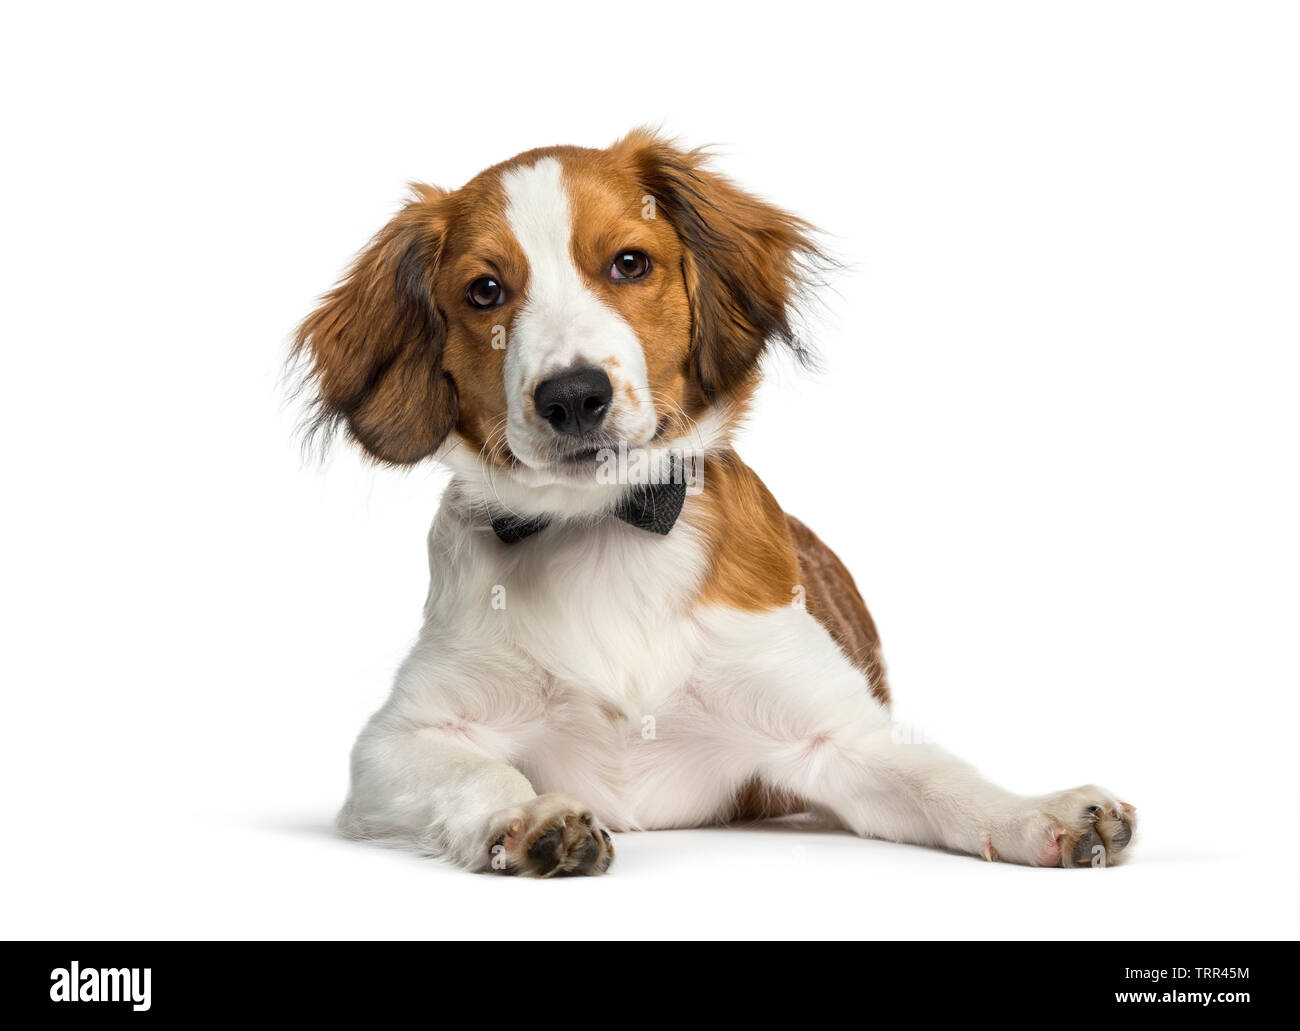 Kooikerhondje, 4 months old, lying in front of white background Stock Photo